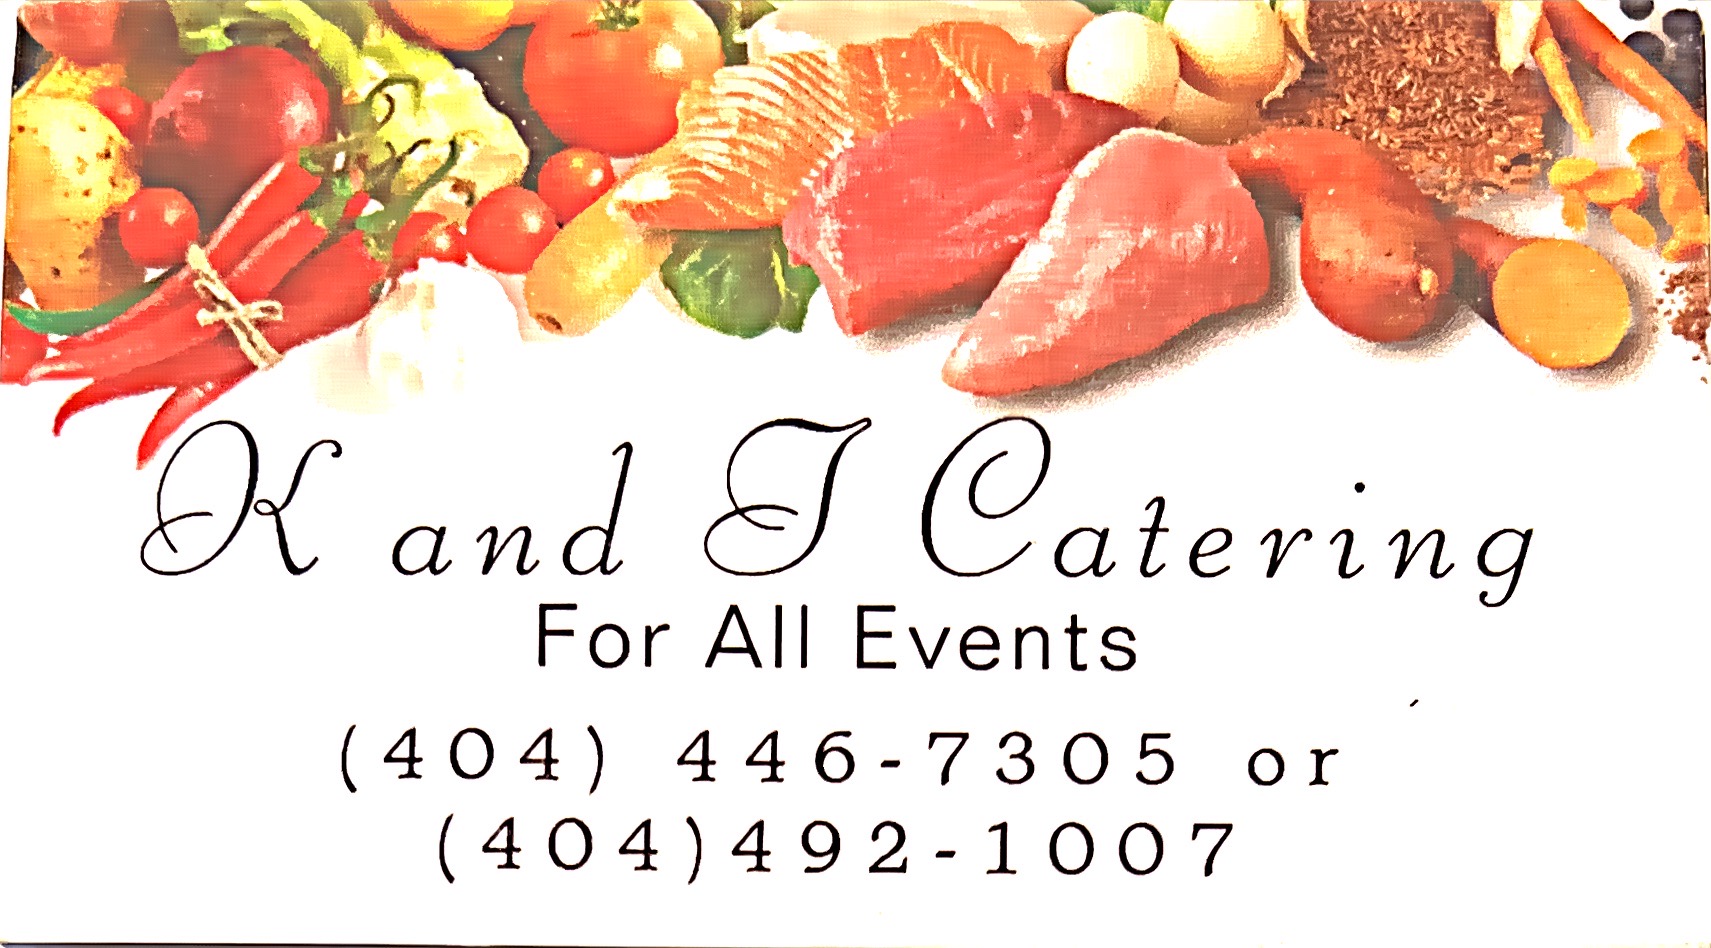 K and T Catering service